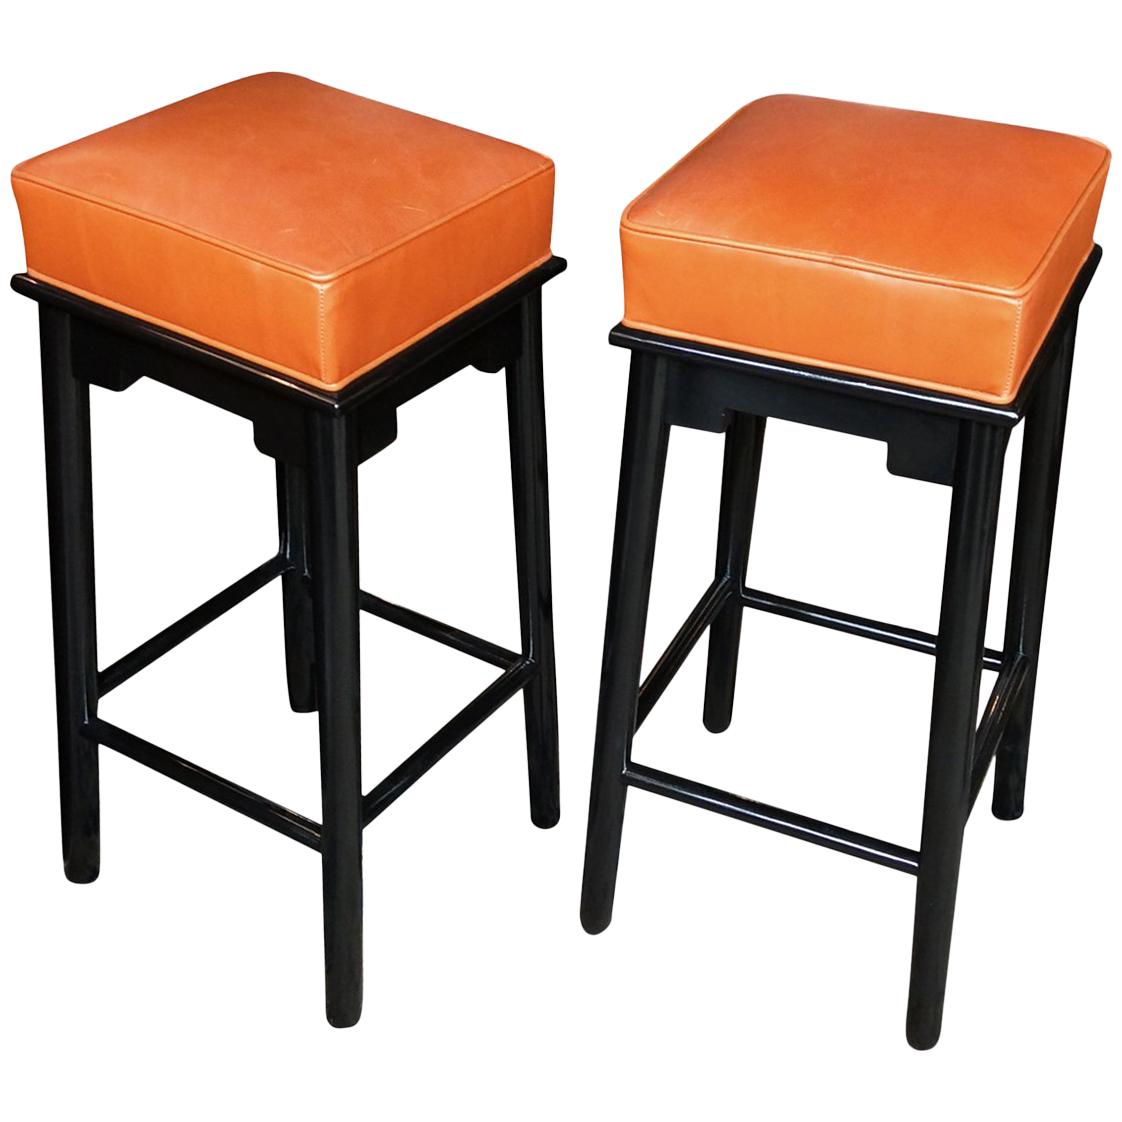 Pair of 1950s Leather and Lacquered Bar Stools in the Style of James Mont For Sale